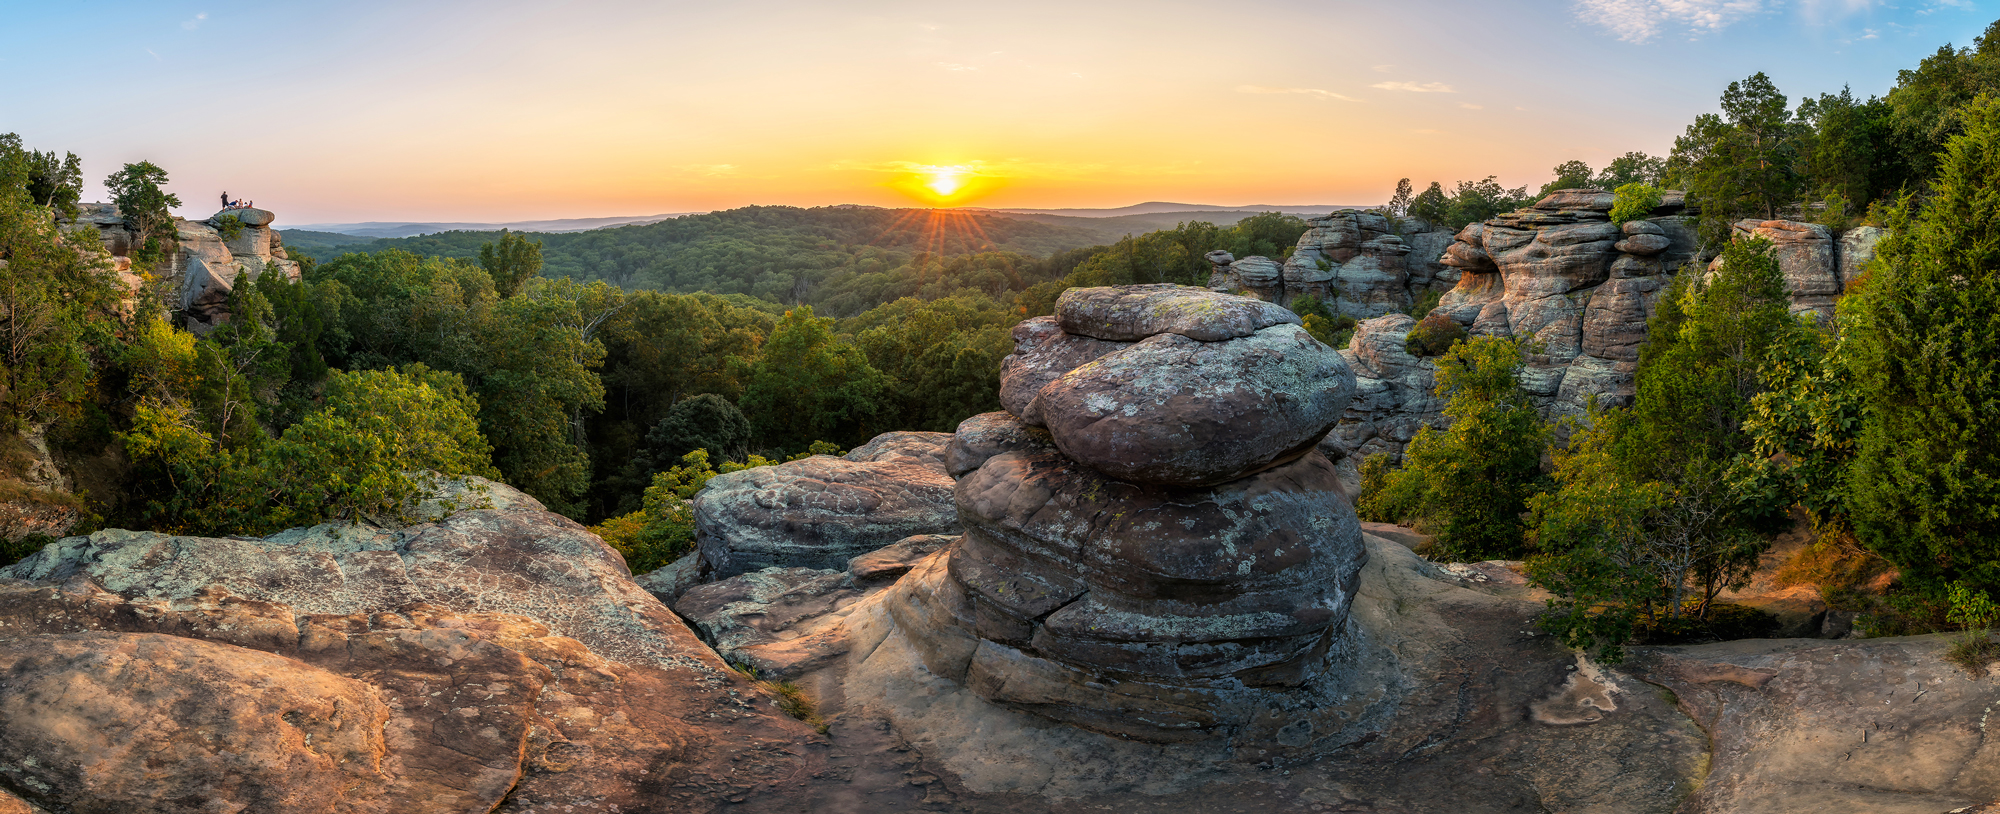 Garden of the Gods in Shawnee National Forest, Illinois